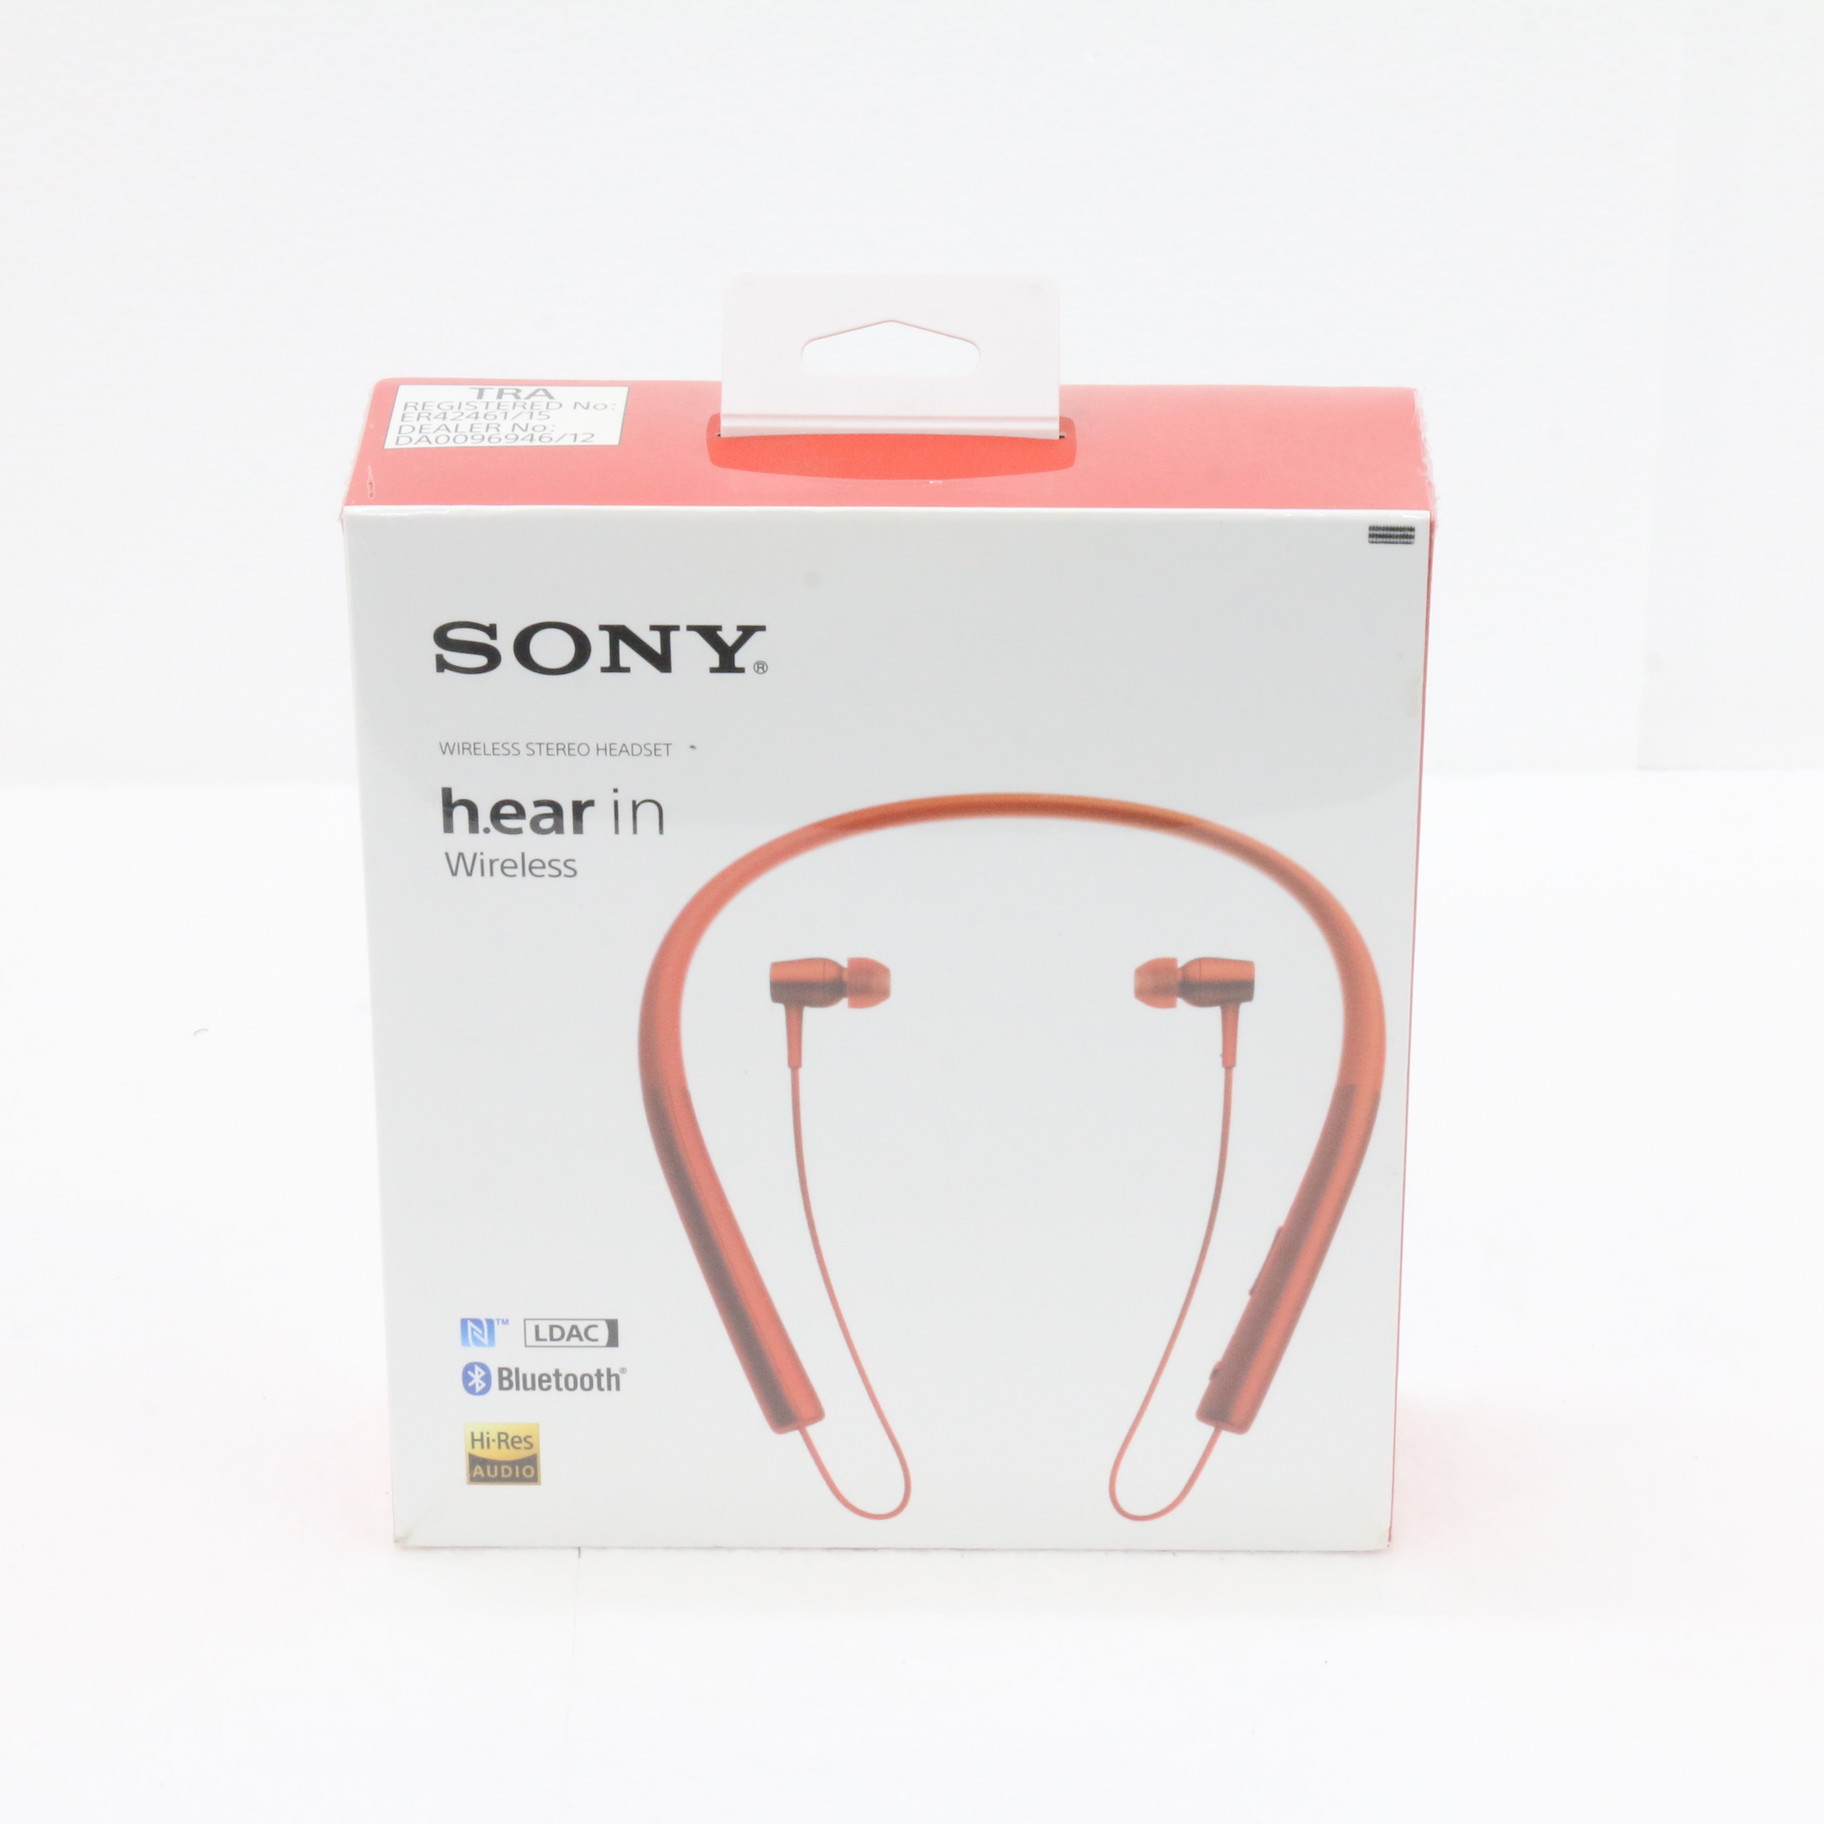 SONY h.ear in Wireless イヤホン MDR-EX750BT( - ヘッドフォン/イヤフォン